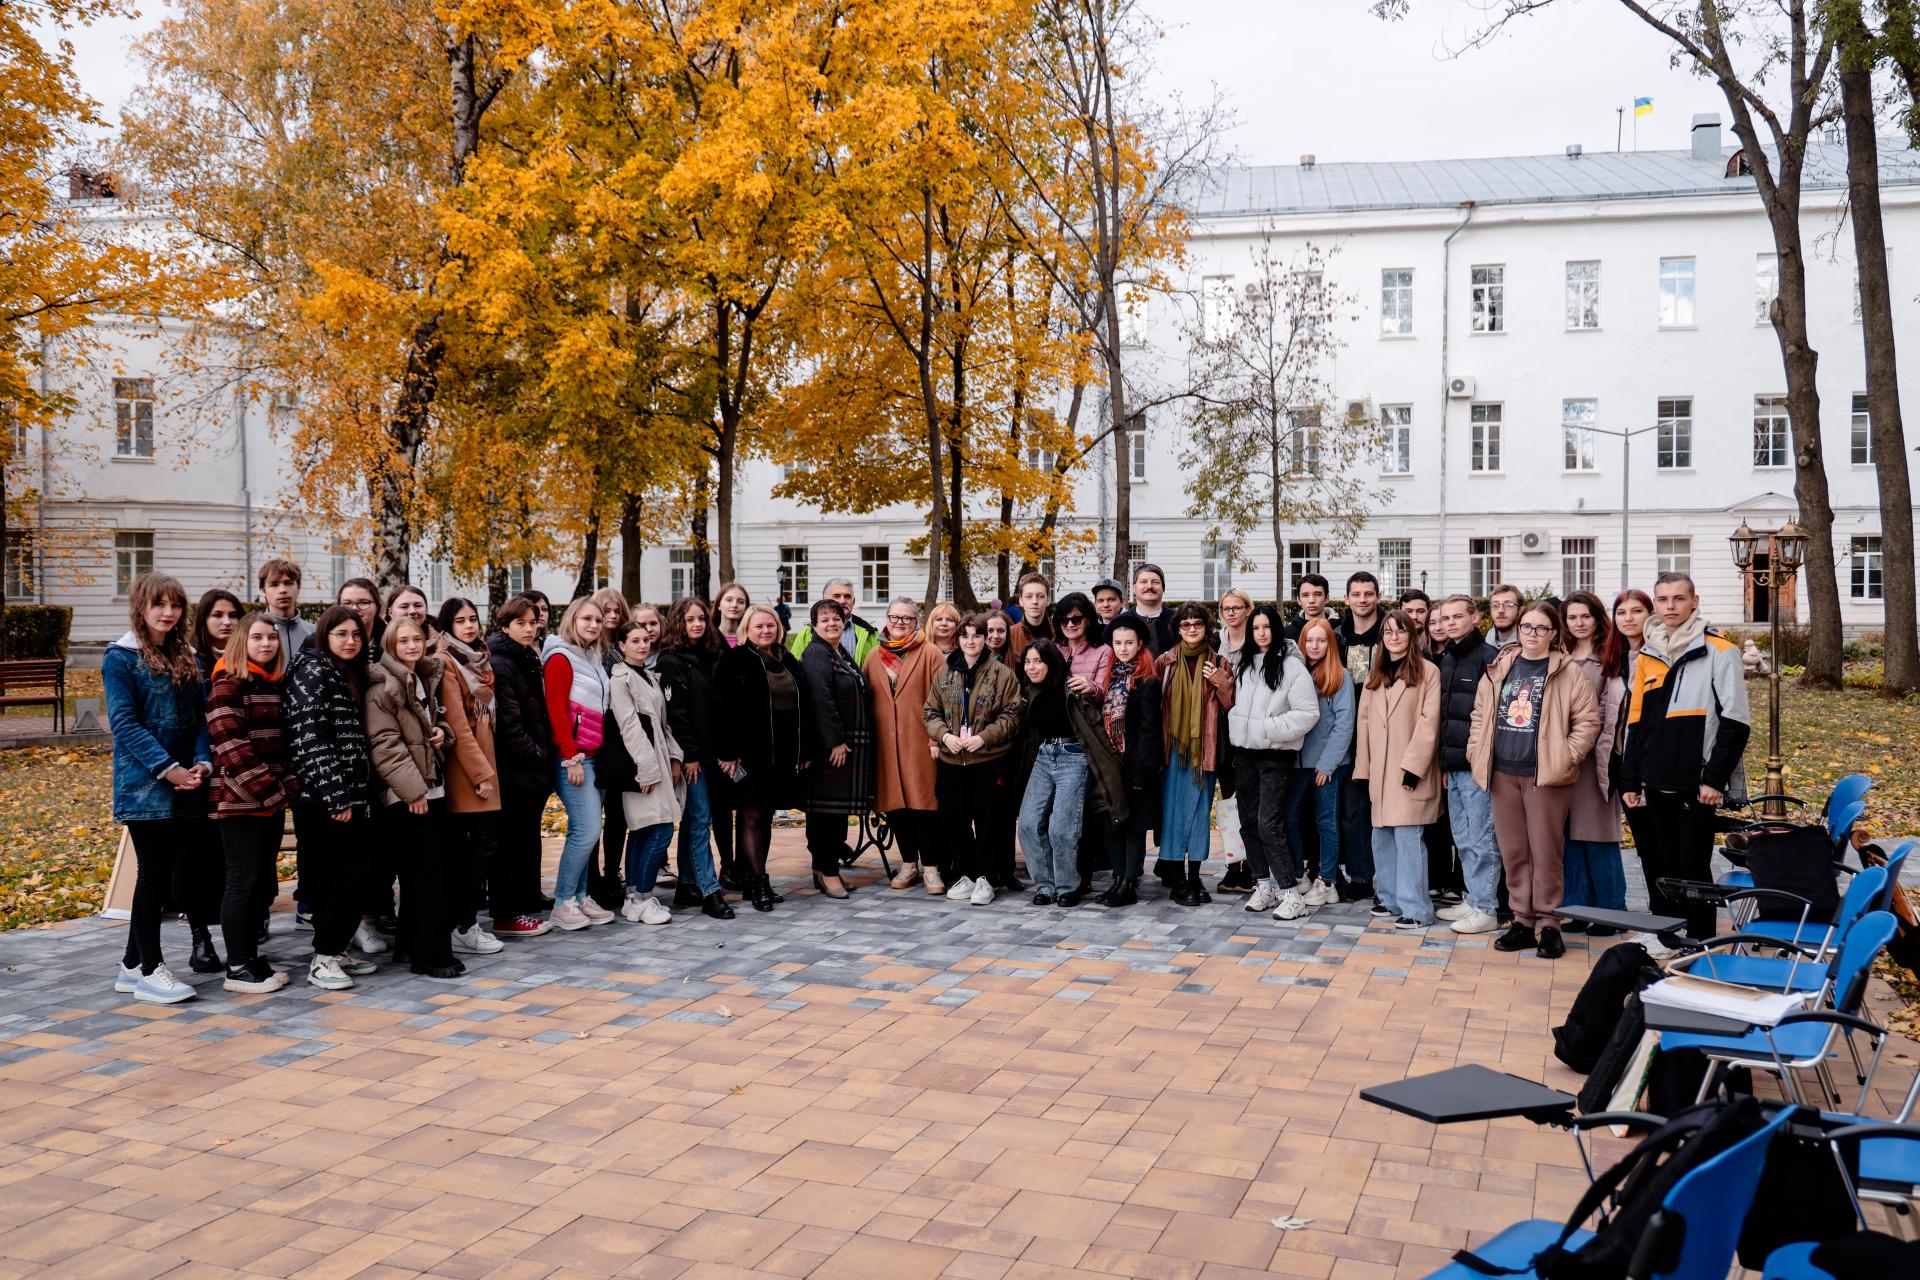 Student artists compete in quick drawing techniques at the All-Ukrainian Plein Air “Autumn...